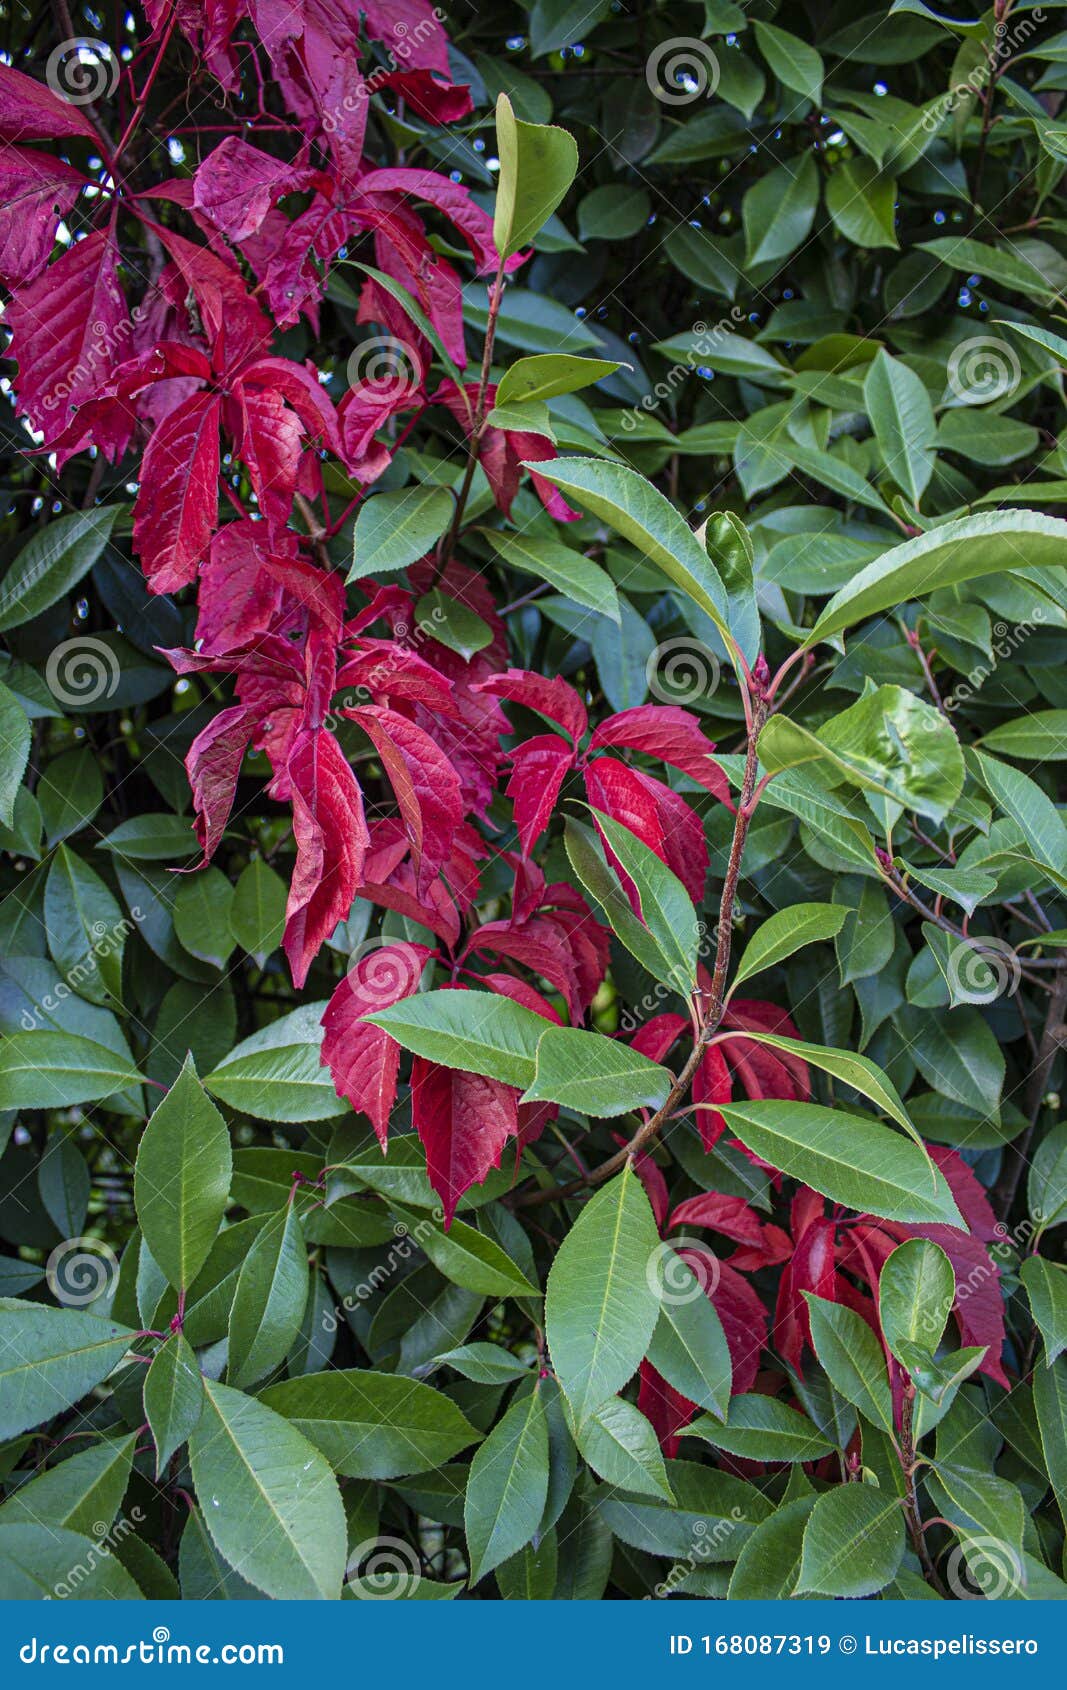 bright red and green leaves